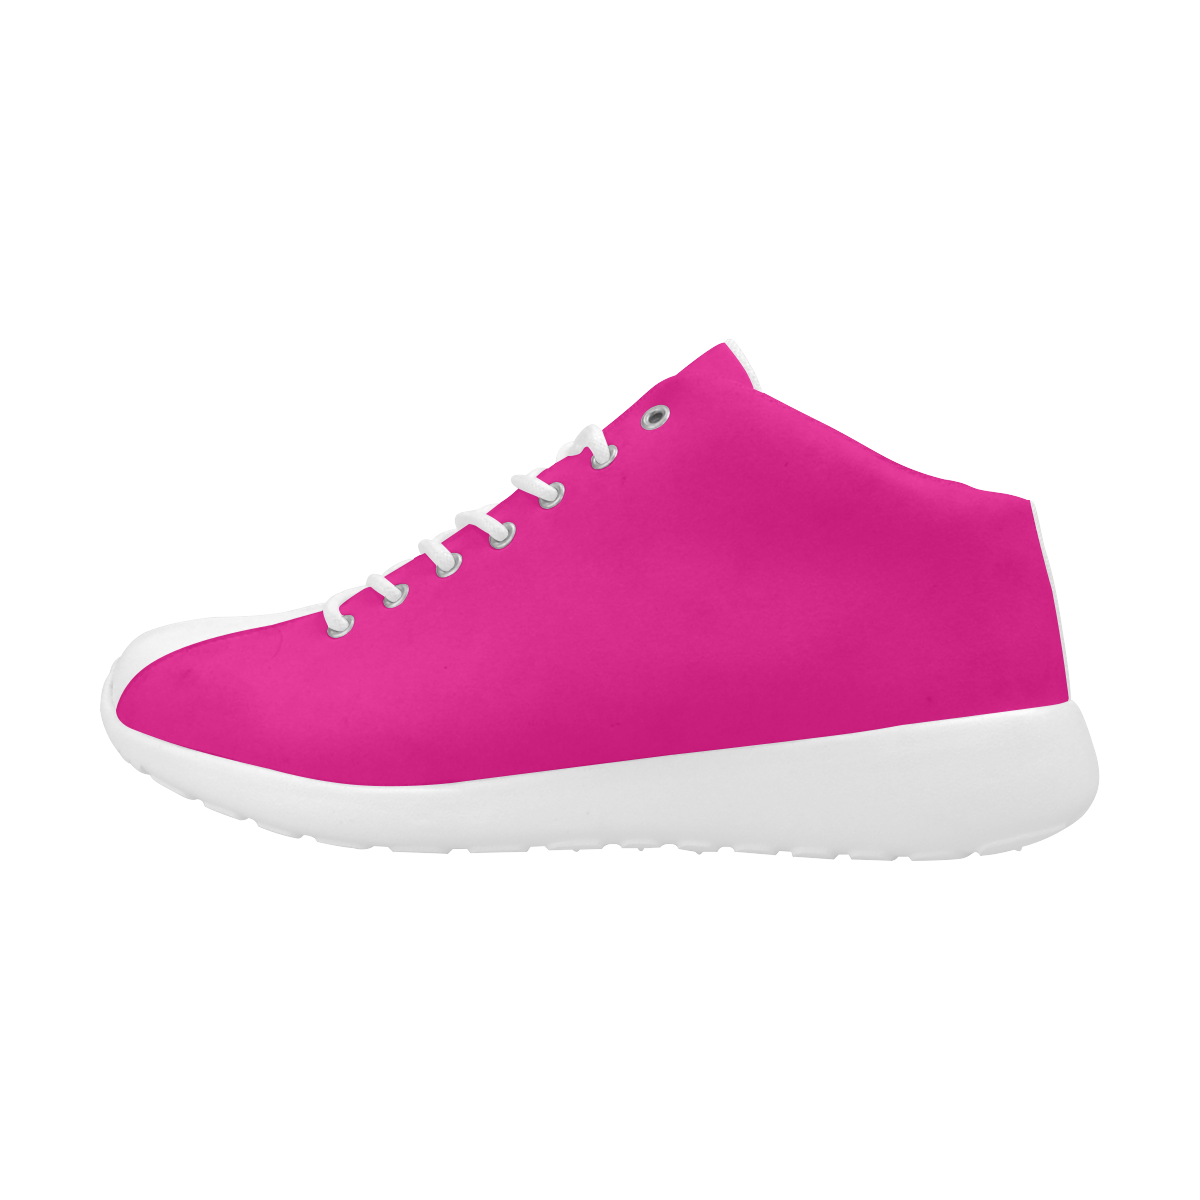 Hot Pink Happiness Men's Basketball Training Shoes (Model 47502)